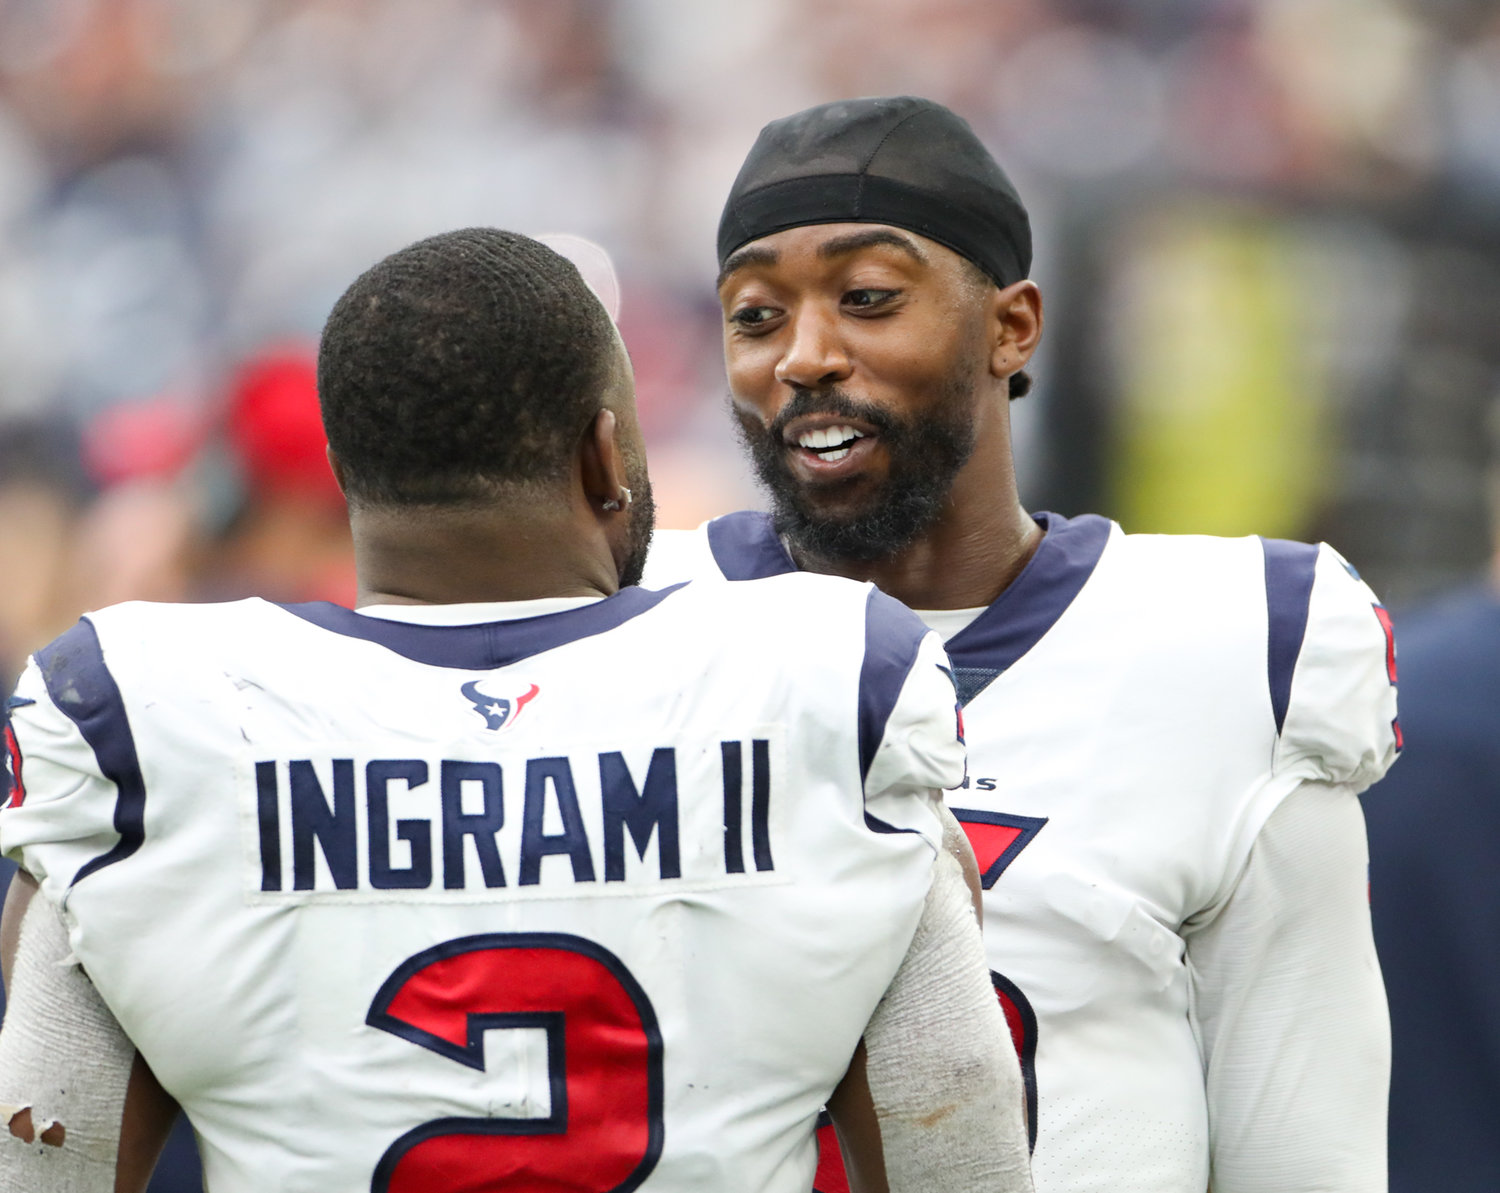 Houston Texans running back Mark Ingram (2) talks with quarterback Tyrod Taylor (5) on the sideline during the second half of an NFL game between the Houston Texans and the Jacksonville Jaguars on September 12, 2021 in Houston, Texas.